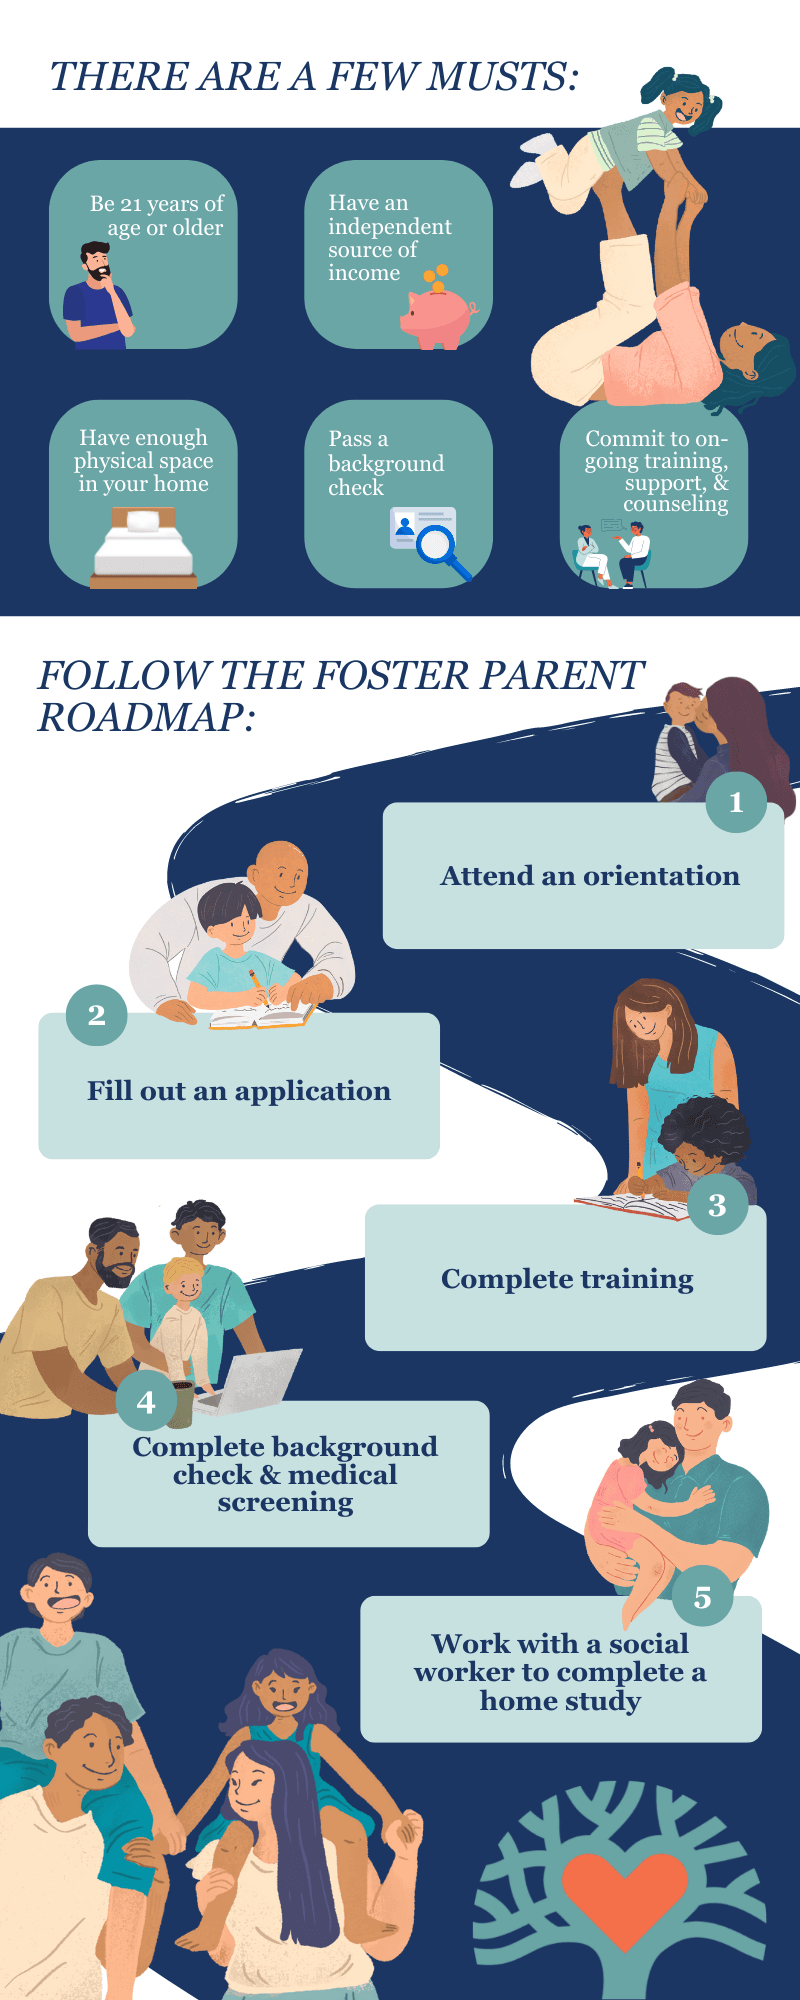 An image describing the various requirements for becoming a foster parent. A foster parent must be at least 21 years old, have an independent source of income, have enough physical space in their home, pass a background check, and commit to ongoing traini